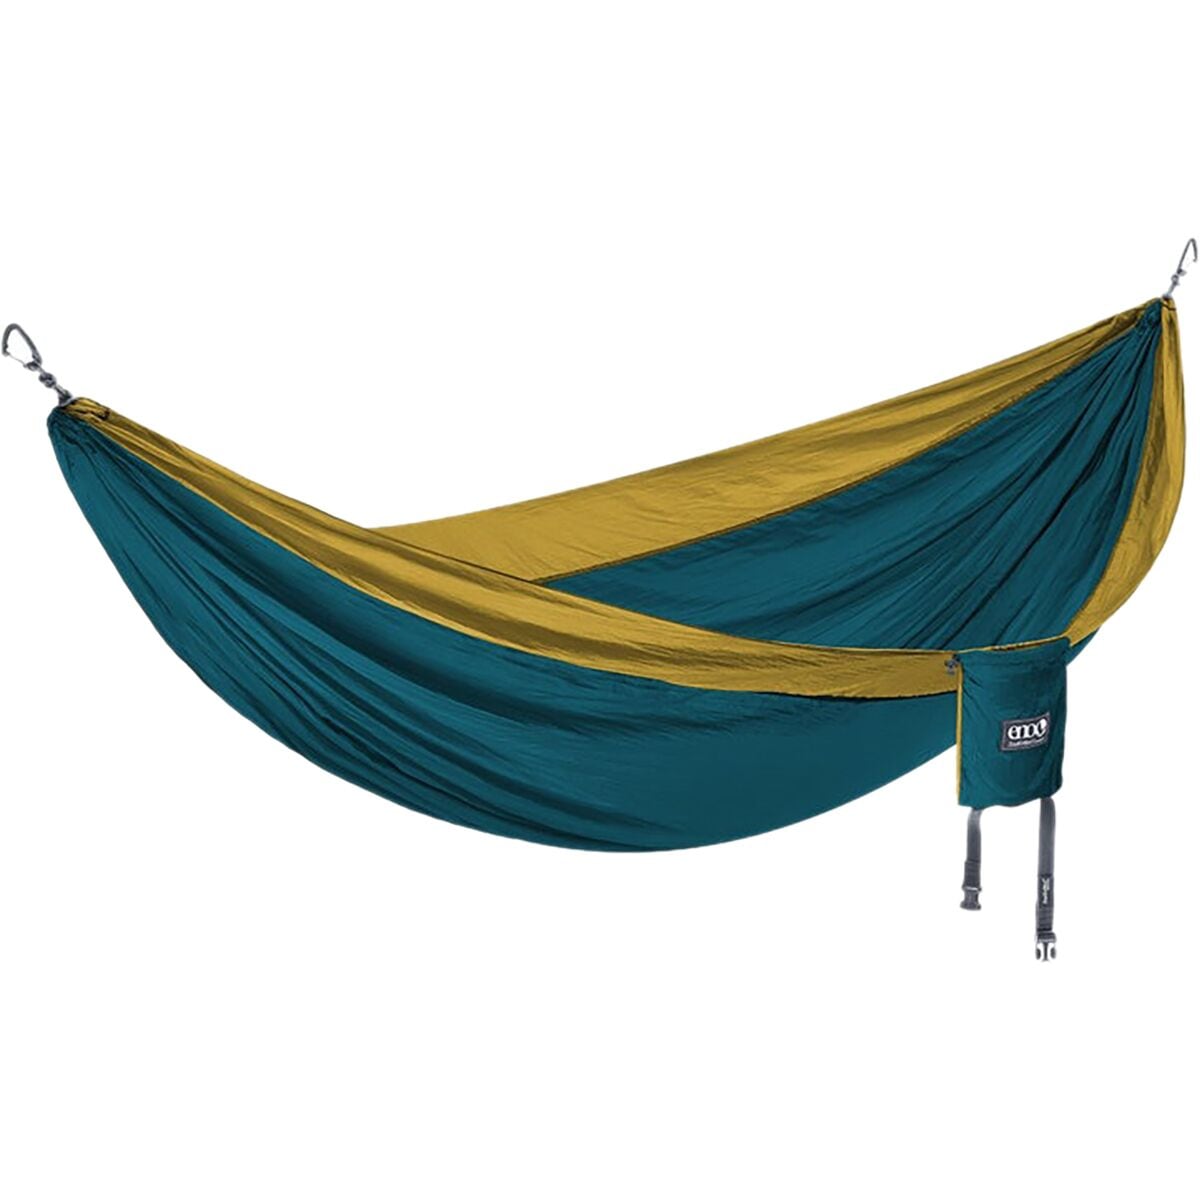 Eagles Nest Outfitters DoubleNest Hammock - Hike & Camp | Backcountry